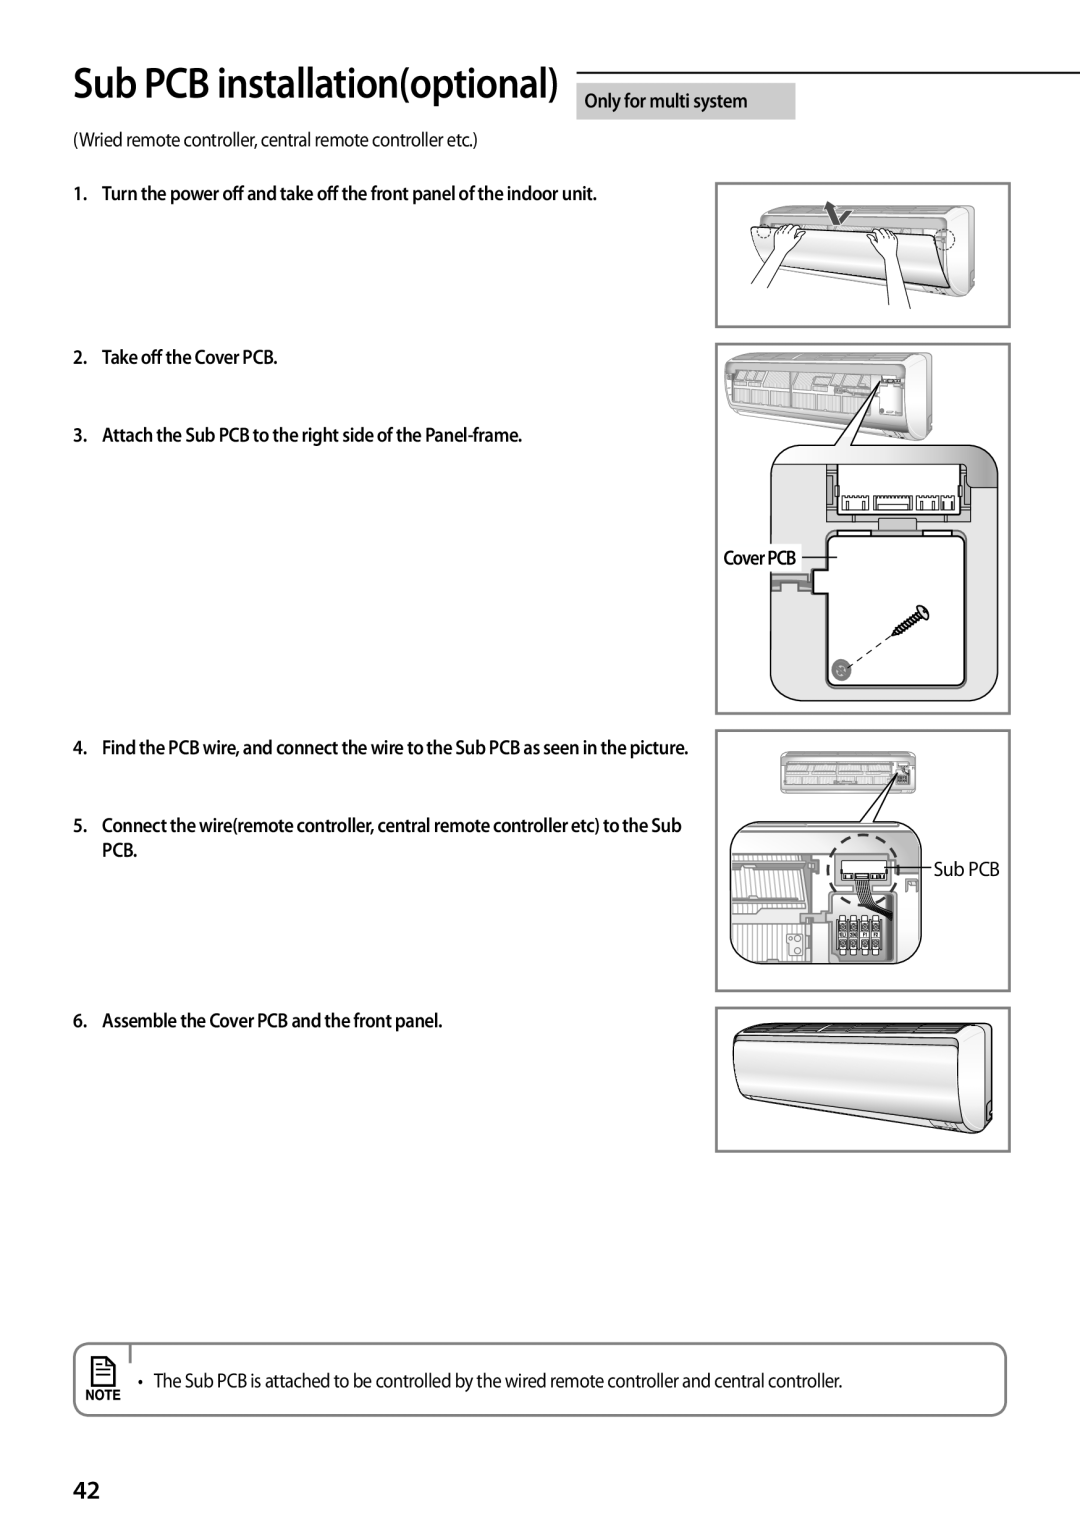 Samsung AQV09PSAX manual Sub PCB installationoptional, Turn the power off and take off the front panel of the indoor unit 